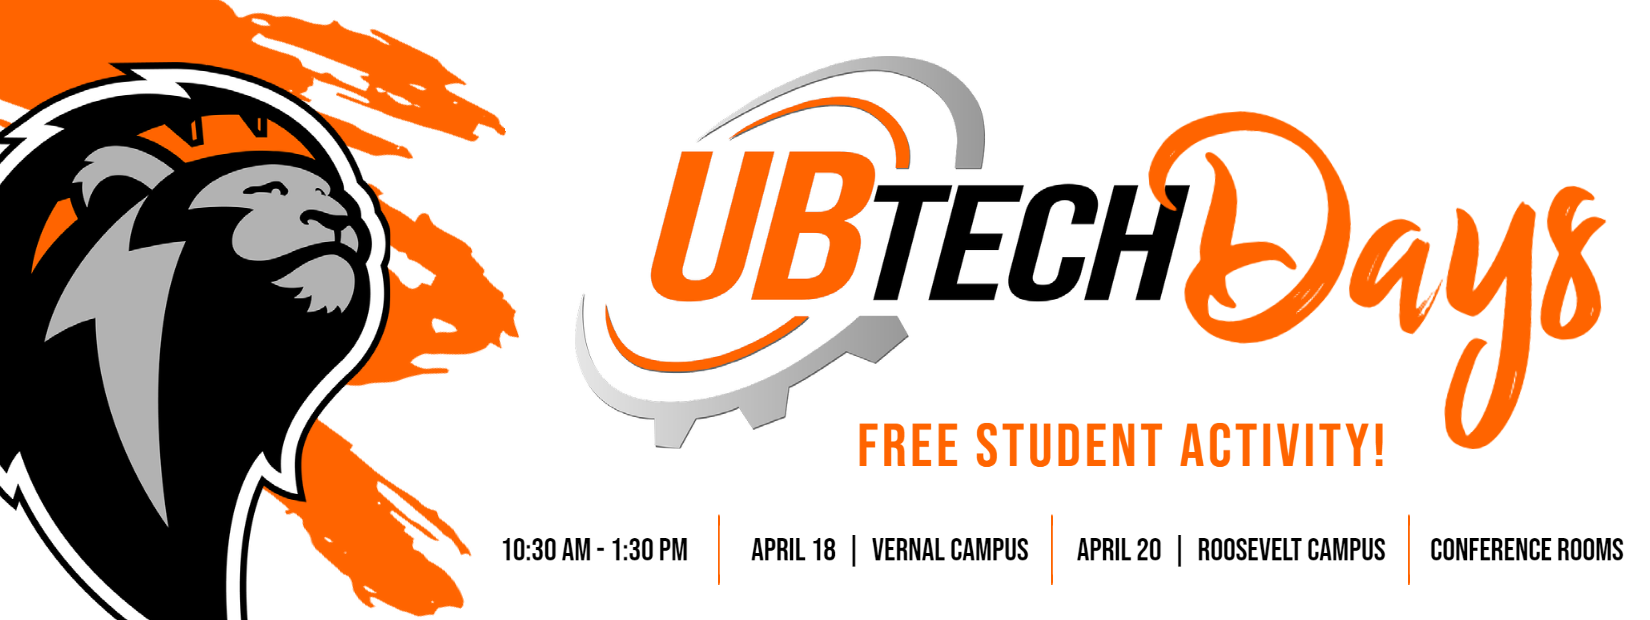 UBTech Days, 10:30am to 1:30pm. April 18th in Vernal; April 20th in Roosevelt.